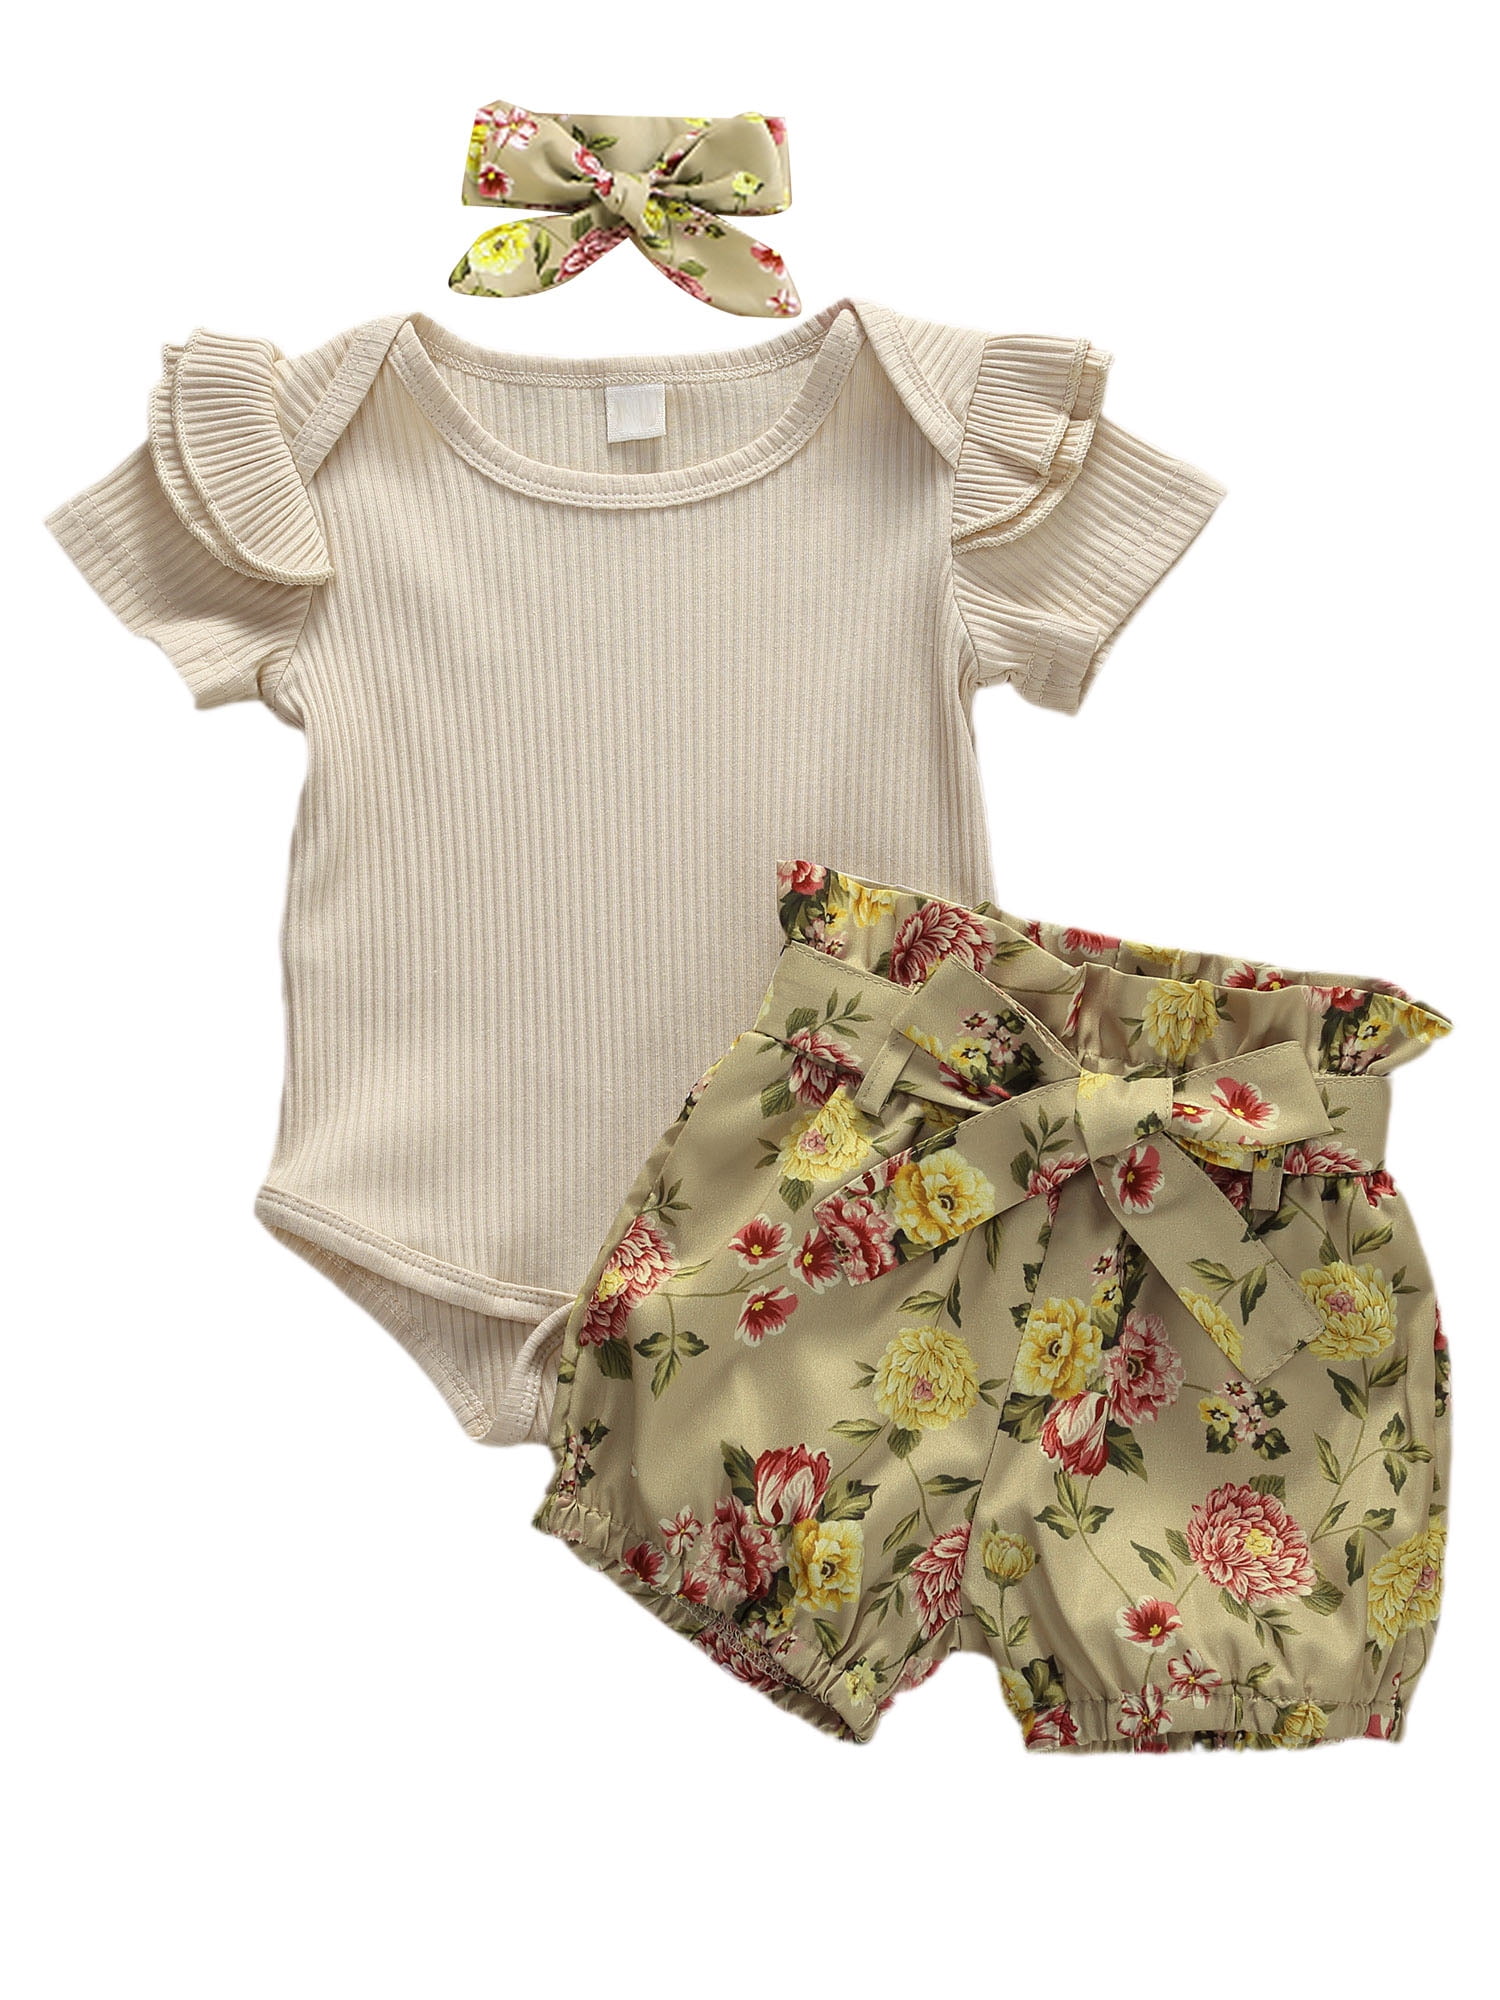 Infant Baby Girl Floral Shorts Clothes Baby Sister Organic Cotton Romper Bodysuit Ruffles Shorts 3PCS Outfit Set Sundress